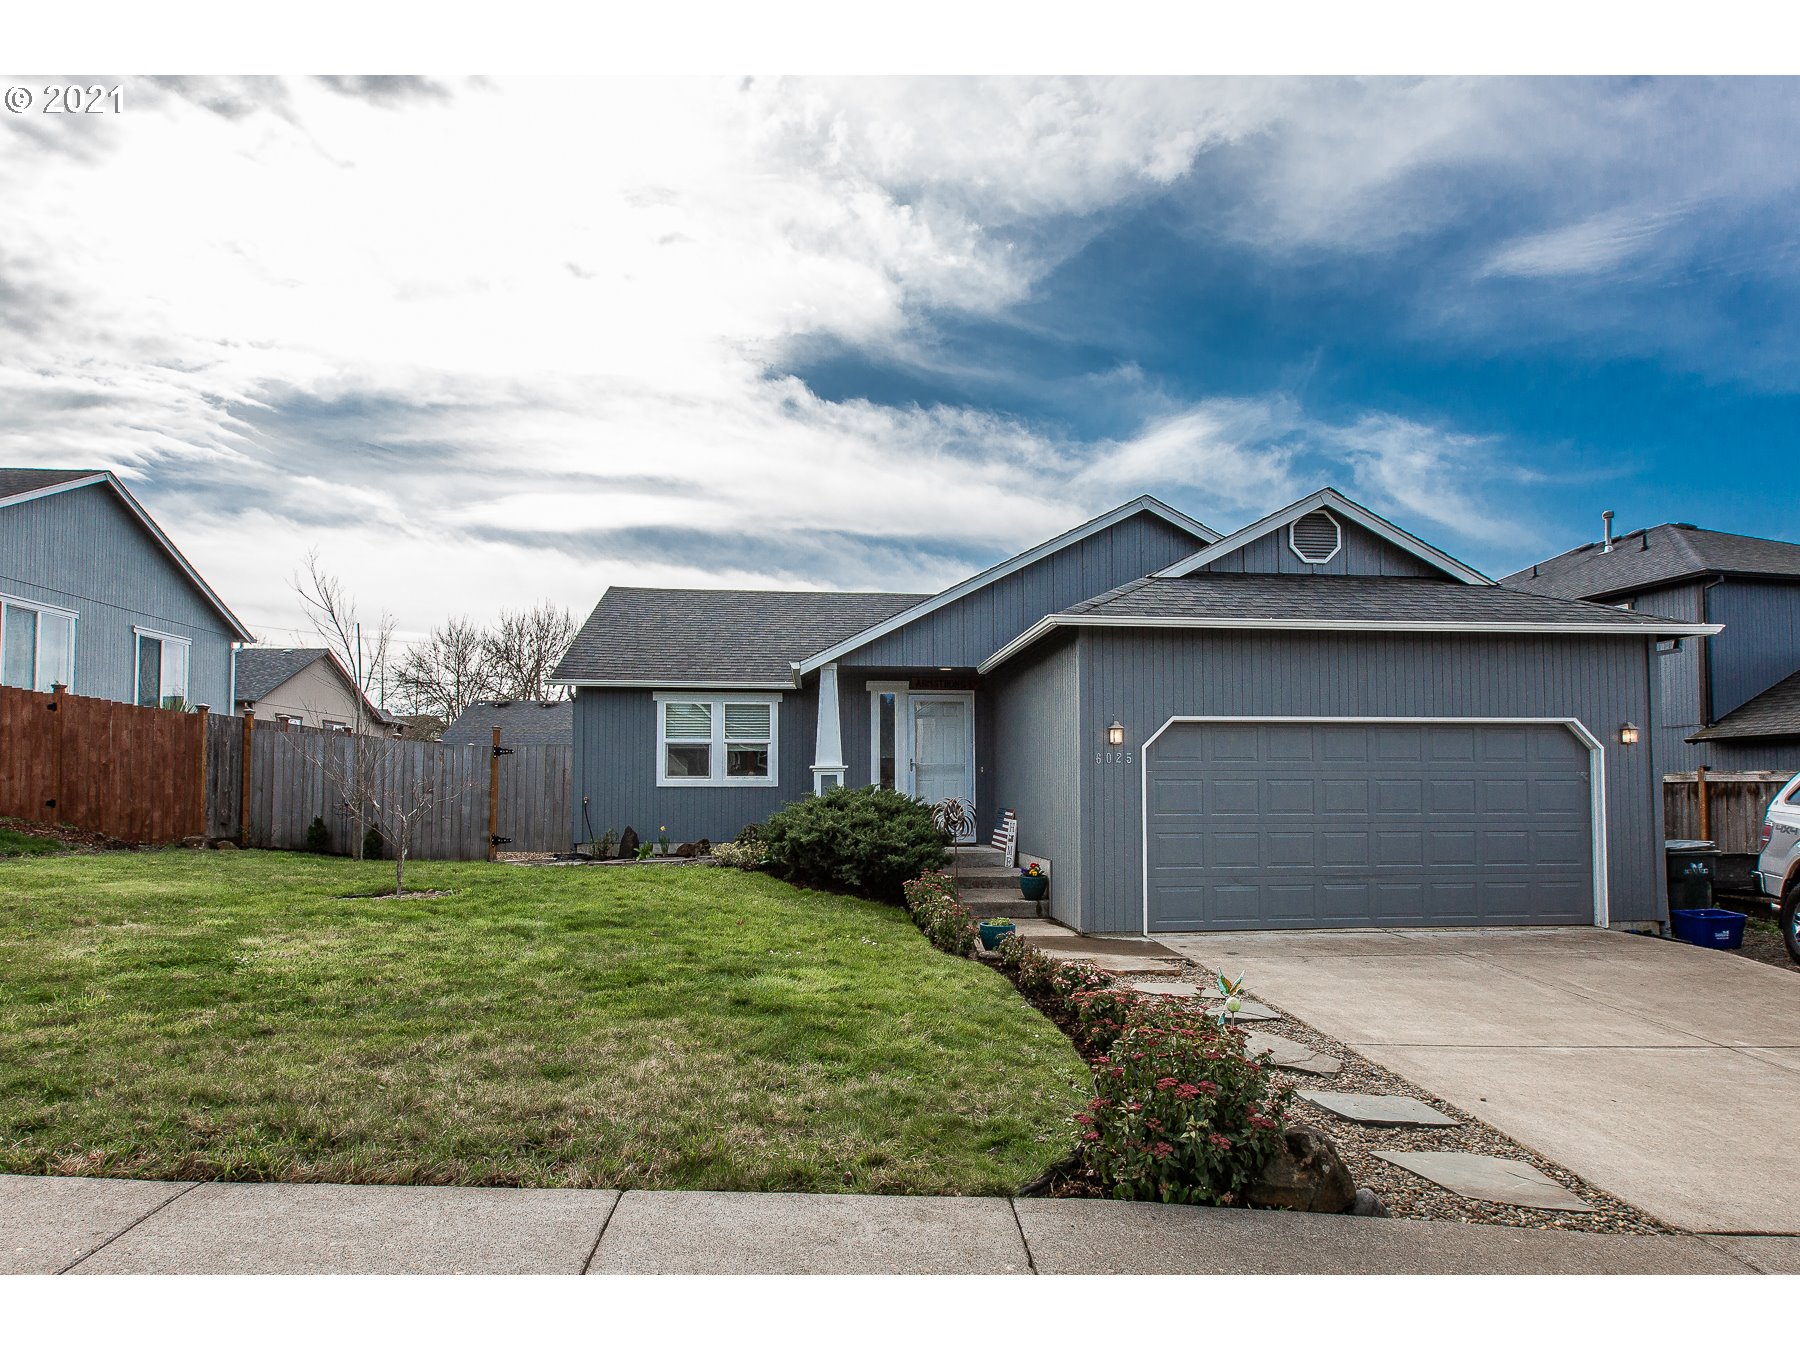 6025 ORCHID LN (1 of 28)